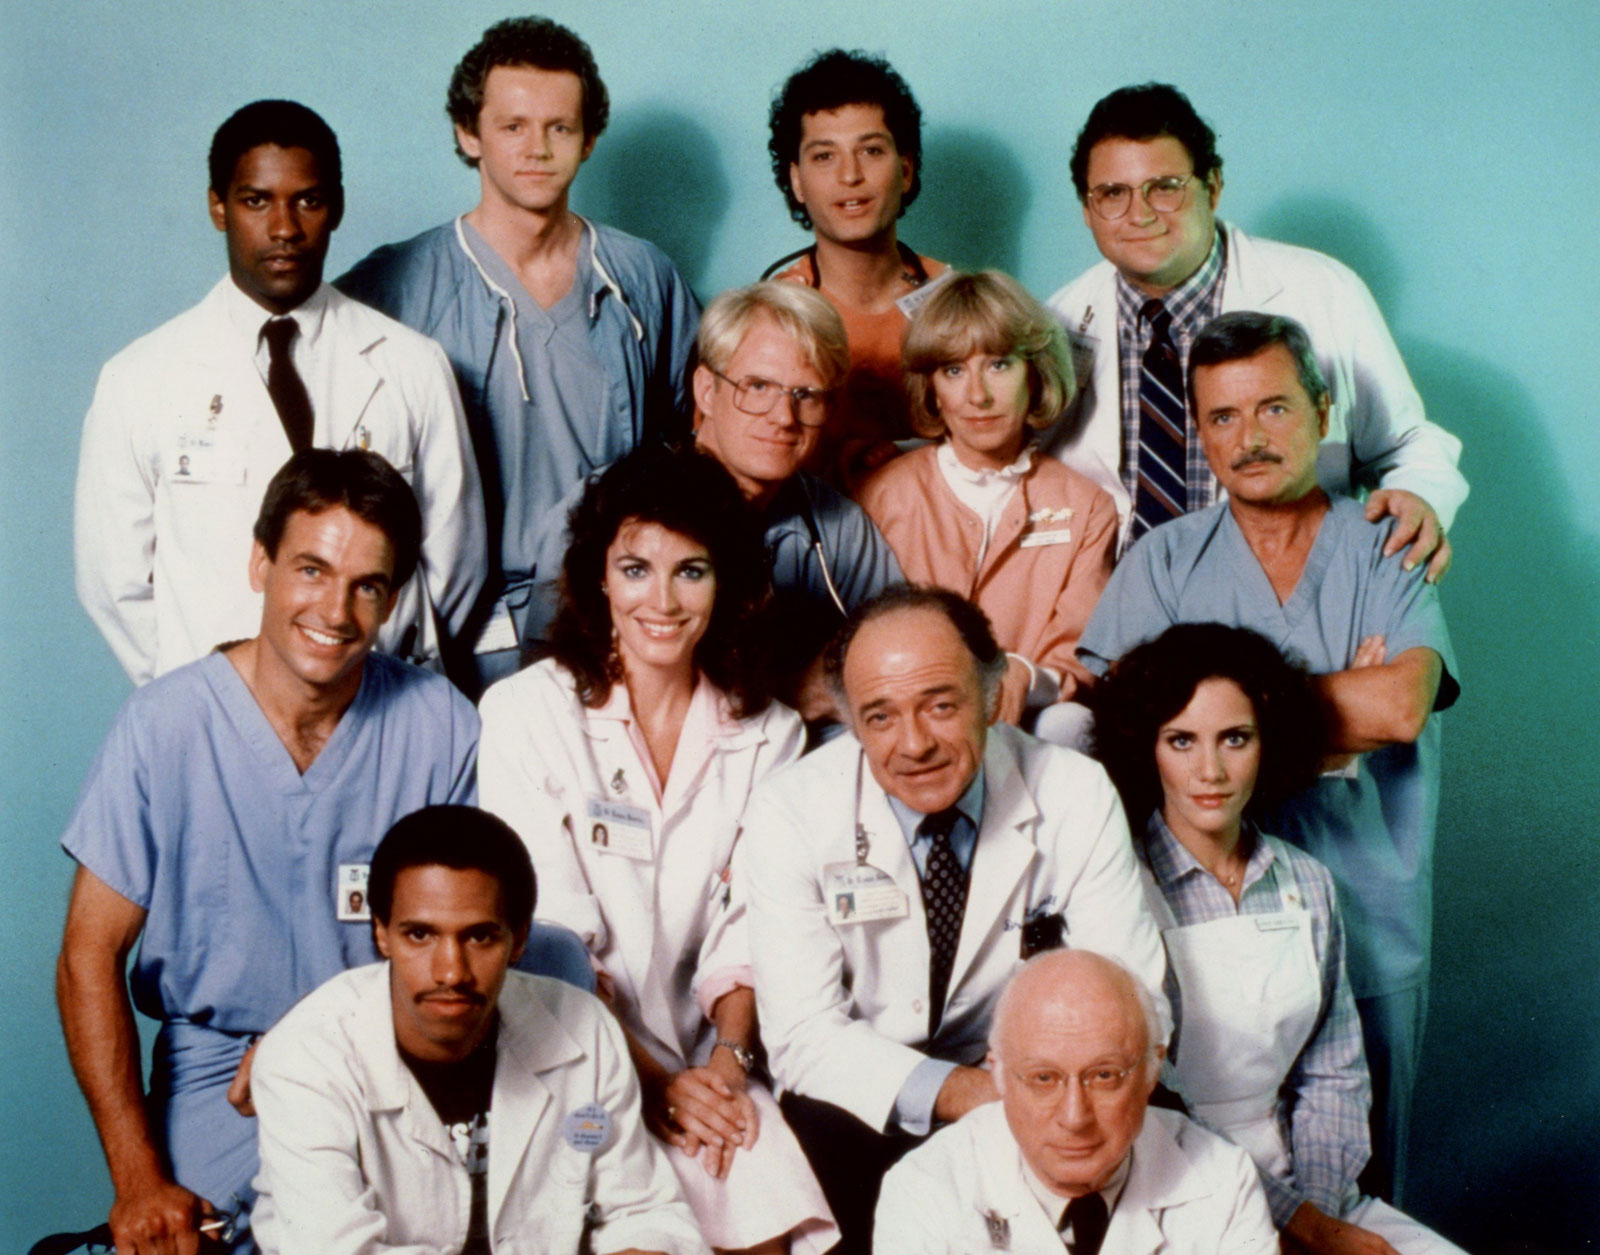 Read on to learn how St. Elsewhere is actually a television show eating bla...